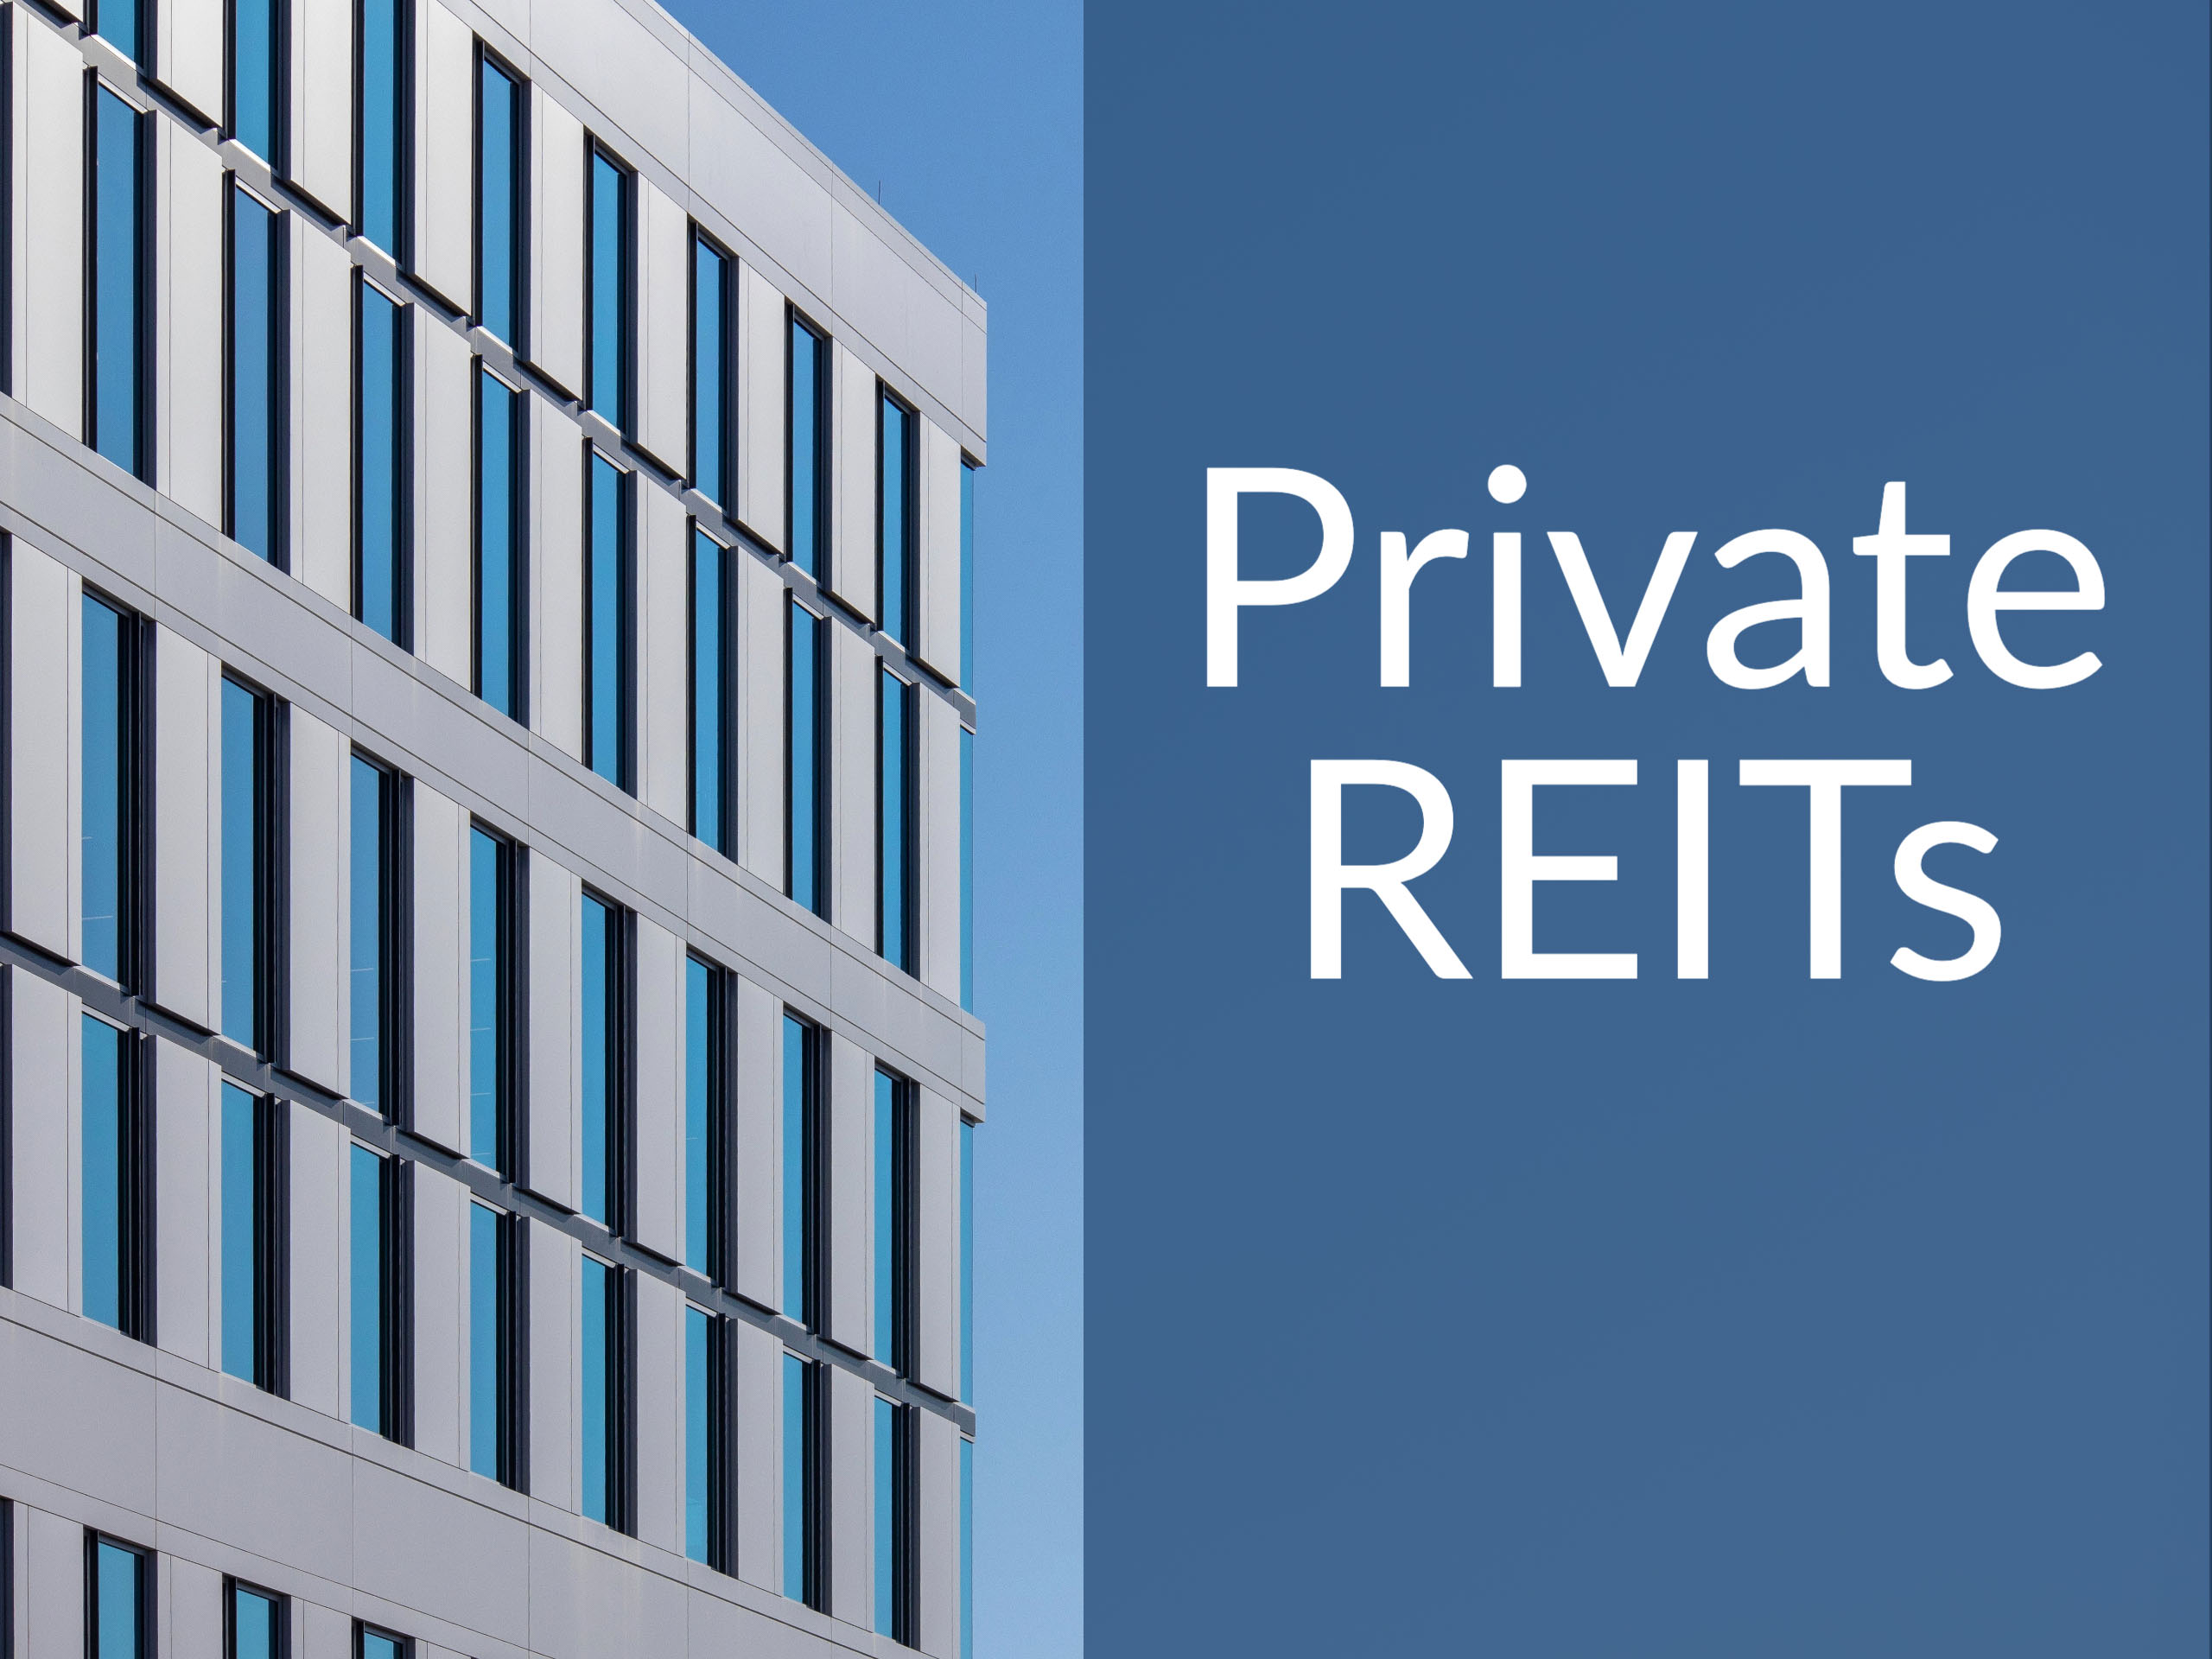 Office building with caption saying "Private REITs"